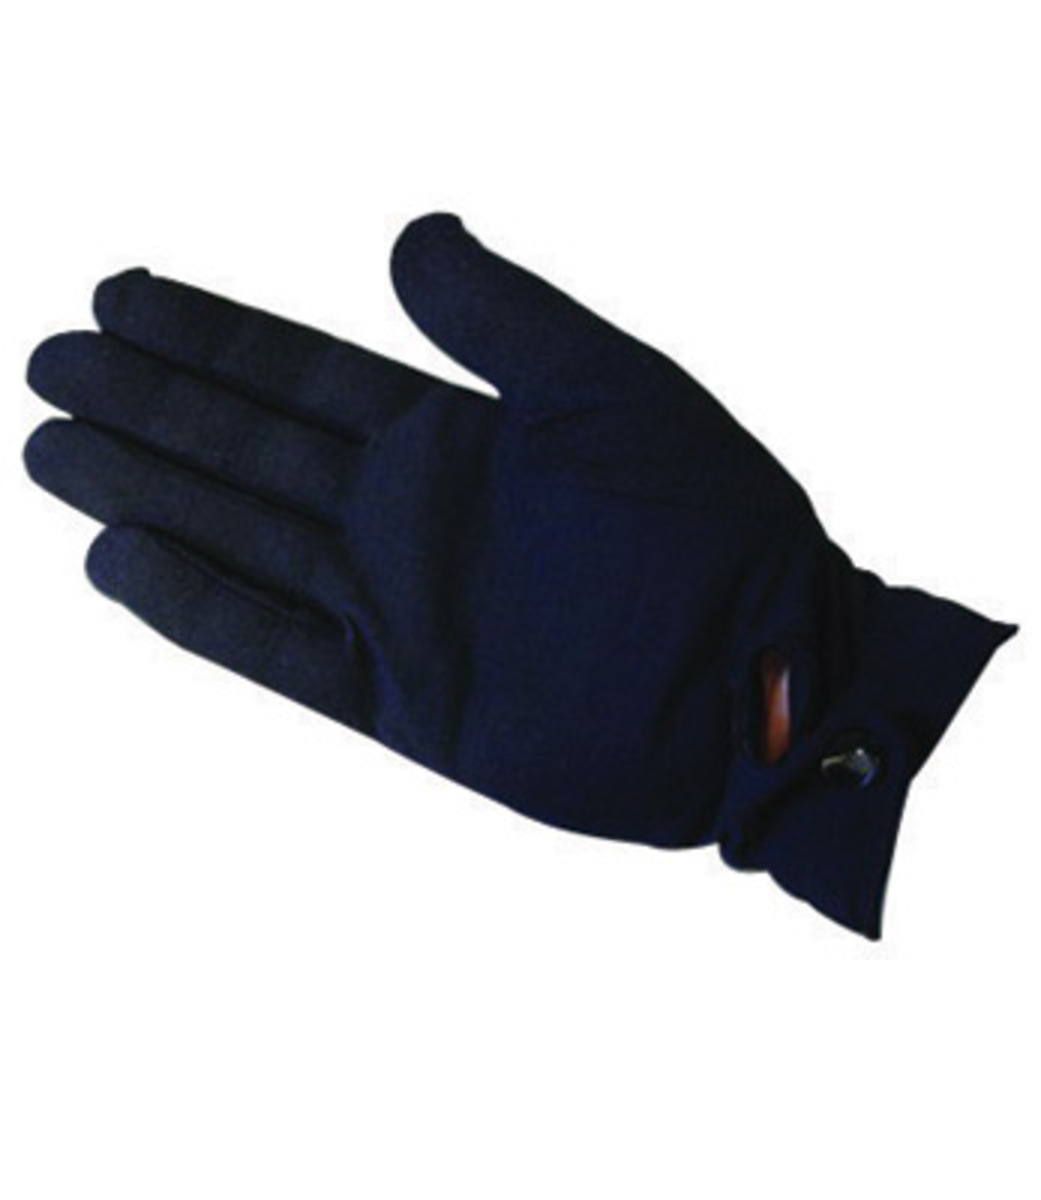 PIP® Cabaret™ Light Weight Nylon Inspection Gloves With Open Cuff